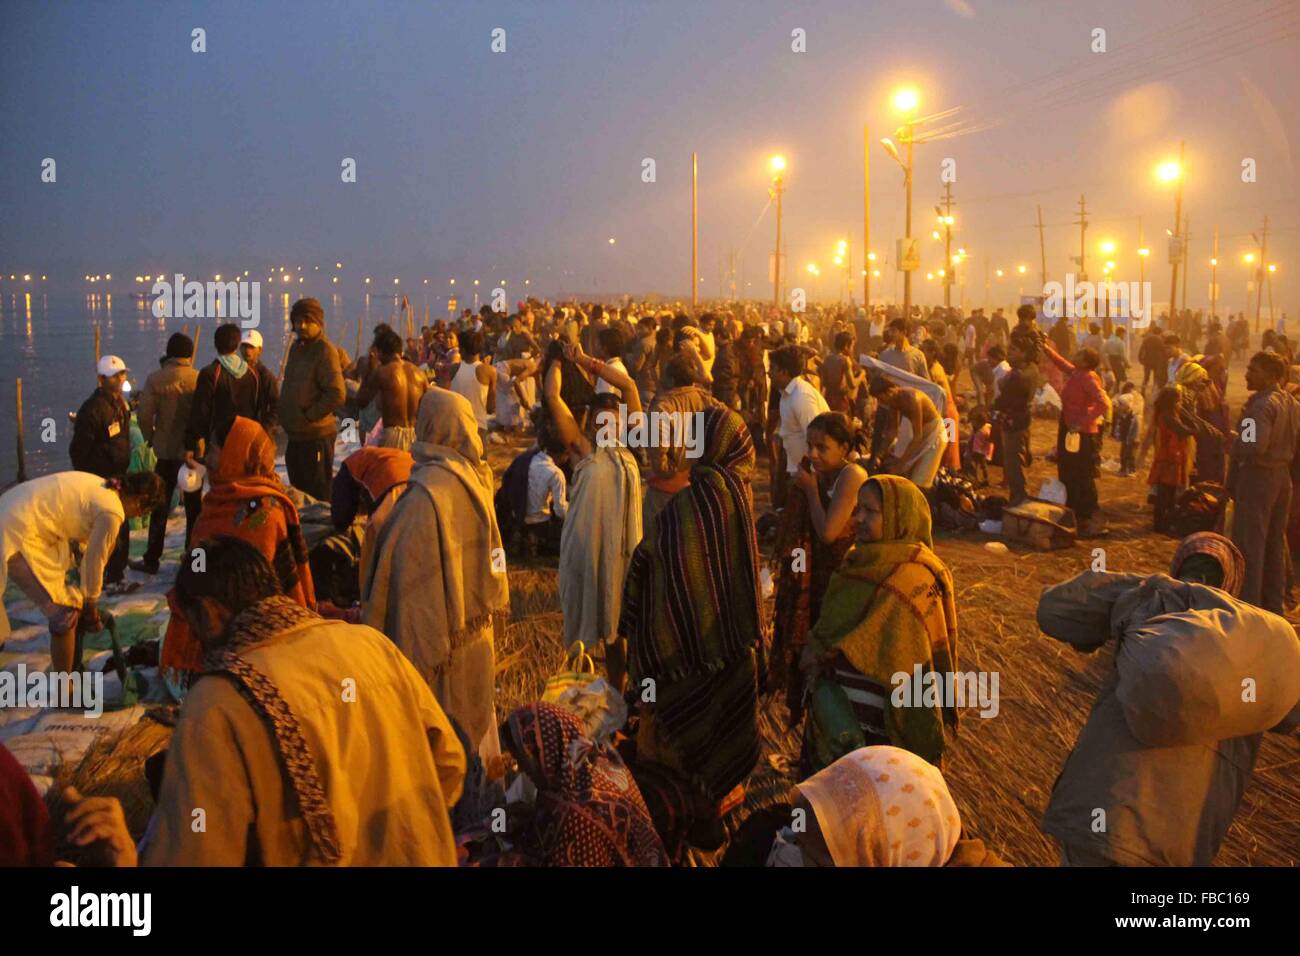 Devotees taking holy dip in river Ganges on the occasion of Makar Sankranti festival at Bank of river Ganges. Makar Sankranti is an Indian festival celebrated in almost all parts of India and Nepal in many cultural forms. It is a harvest festival. (Photo by Amar Deep / Pacific Press) Stock Photo